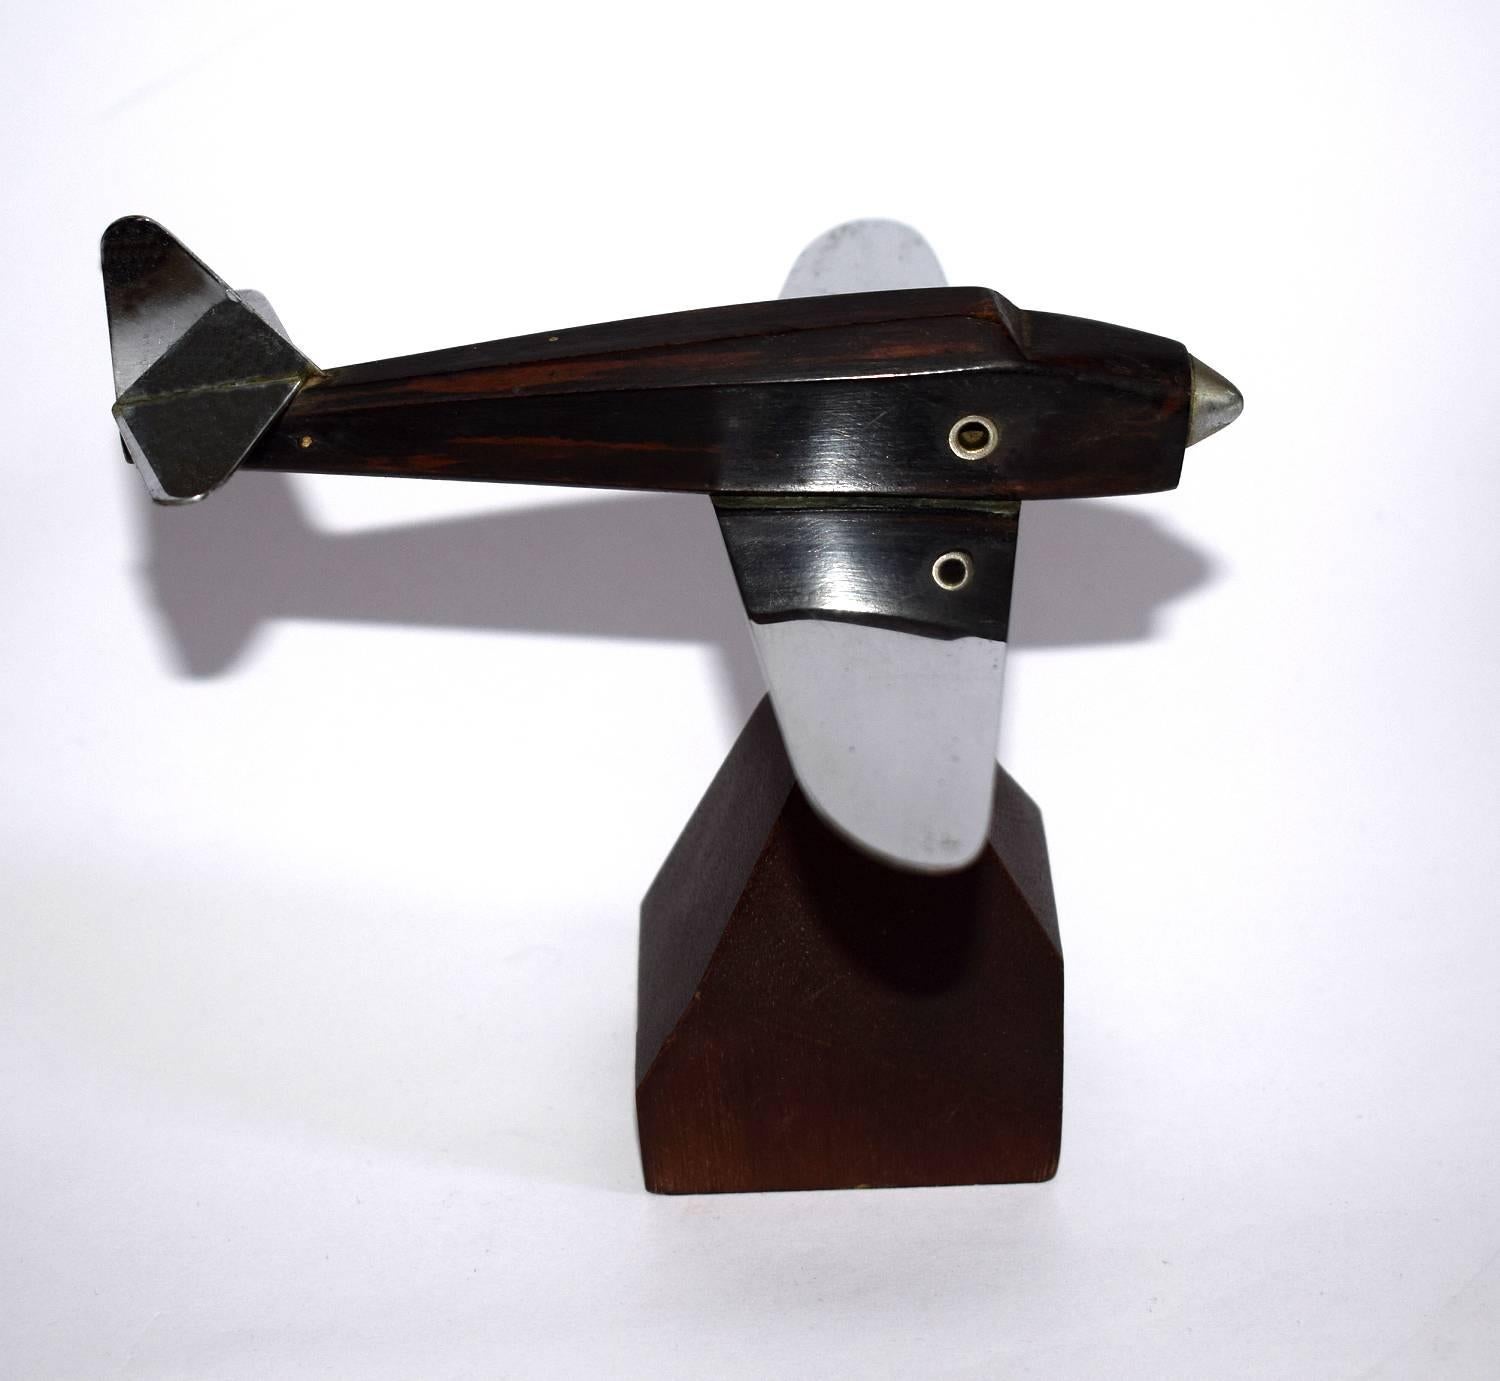 Originating from France is this wonderful airplane model. These make ideal paper weights or desk ornaments. This one is in great condition with no damage just minor signs indicating its age.